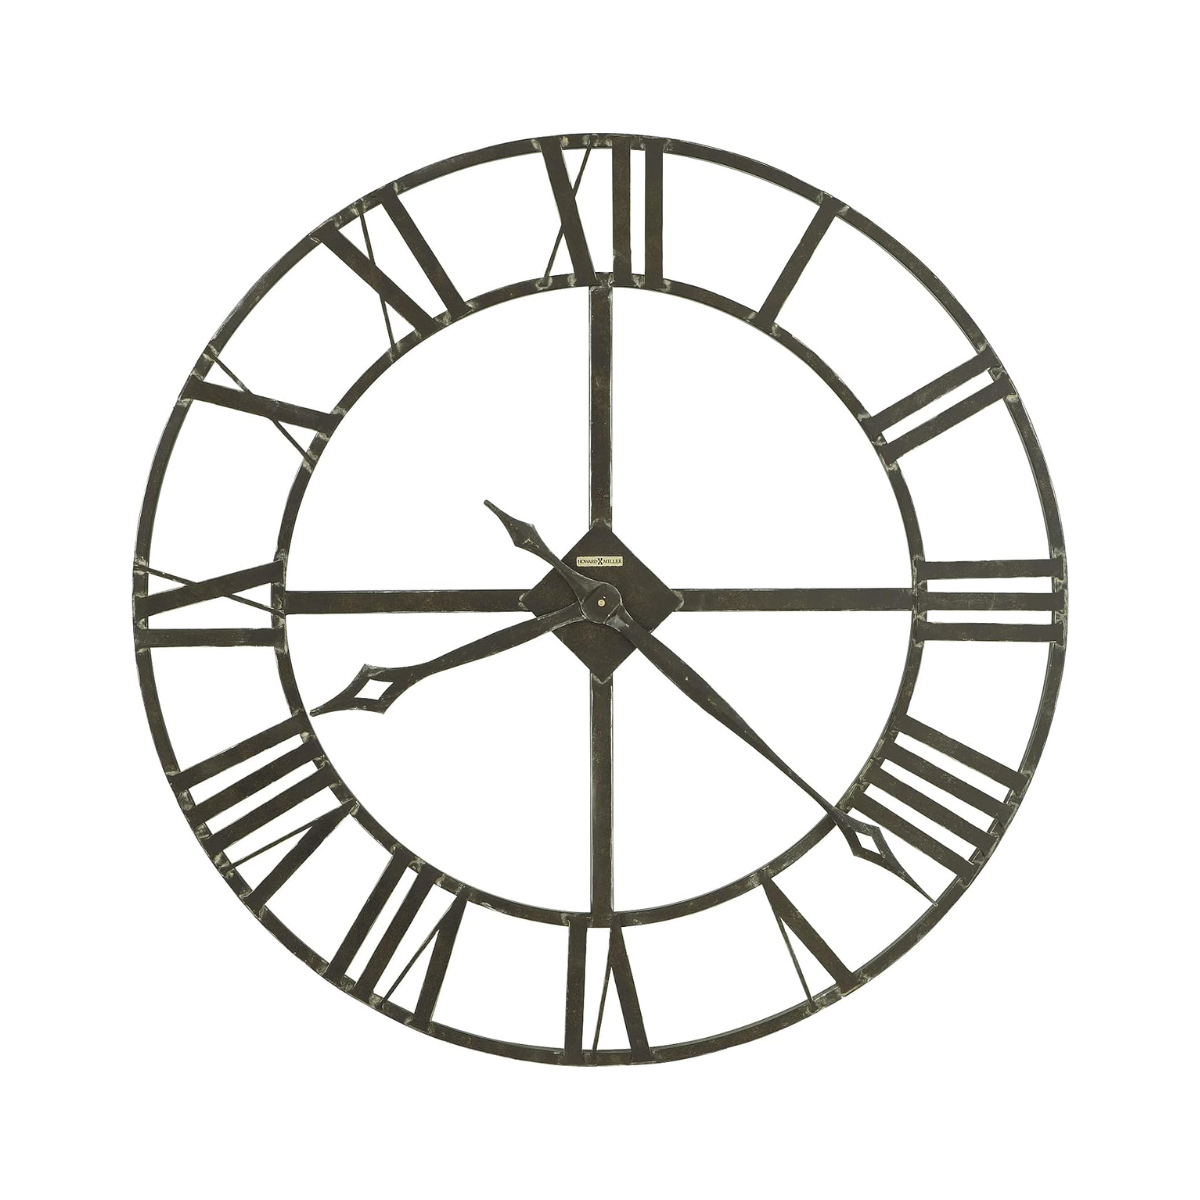 37. Timelessly Romantic: Iron-Infused Wall Clock, a Uniquely Personalized Anniversary Gift for Her